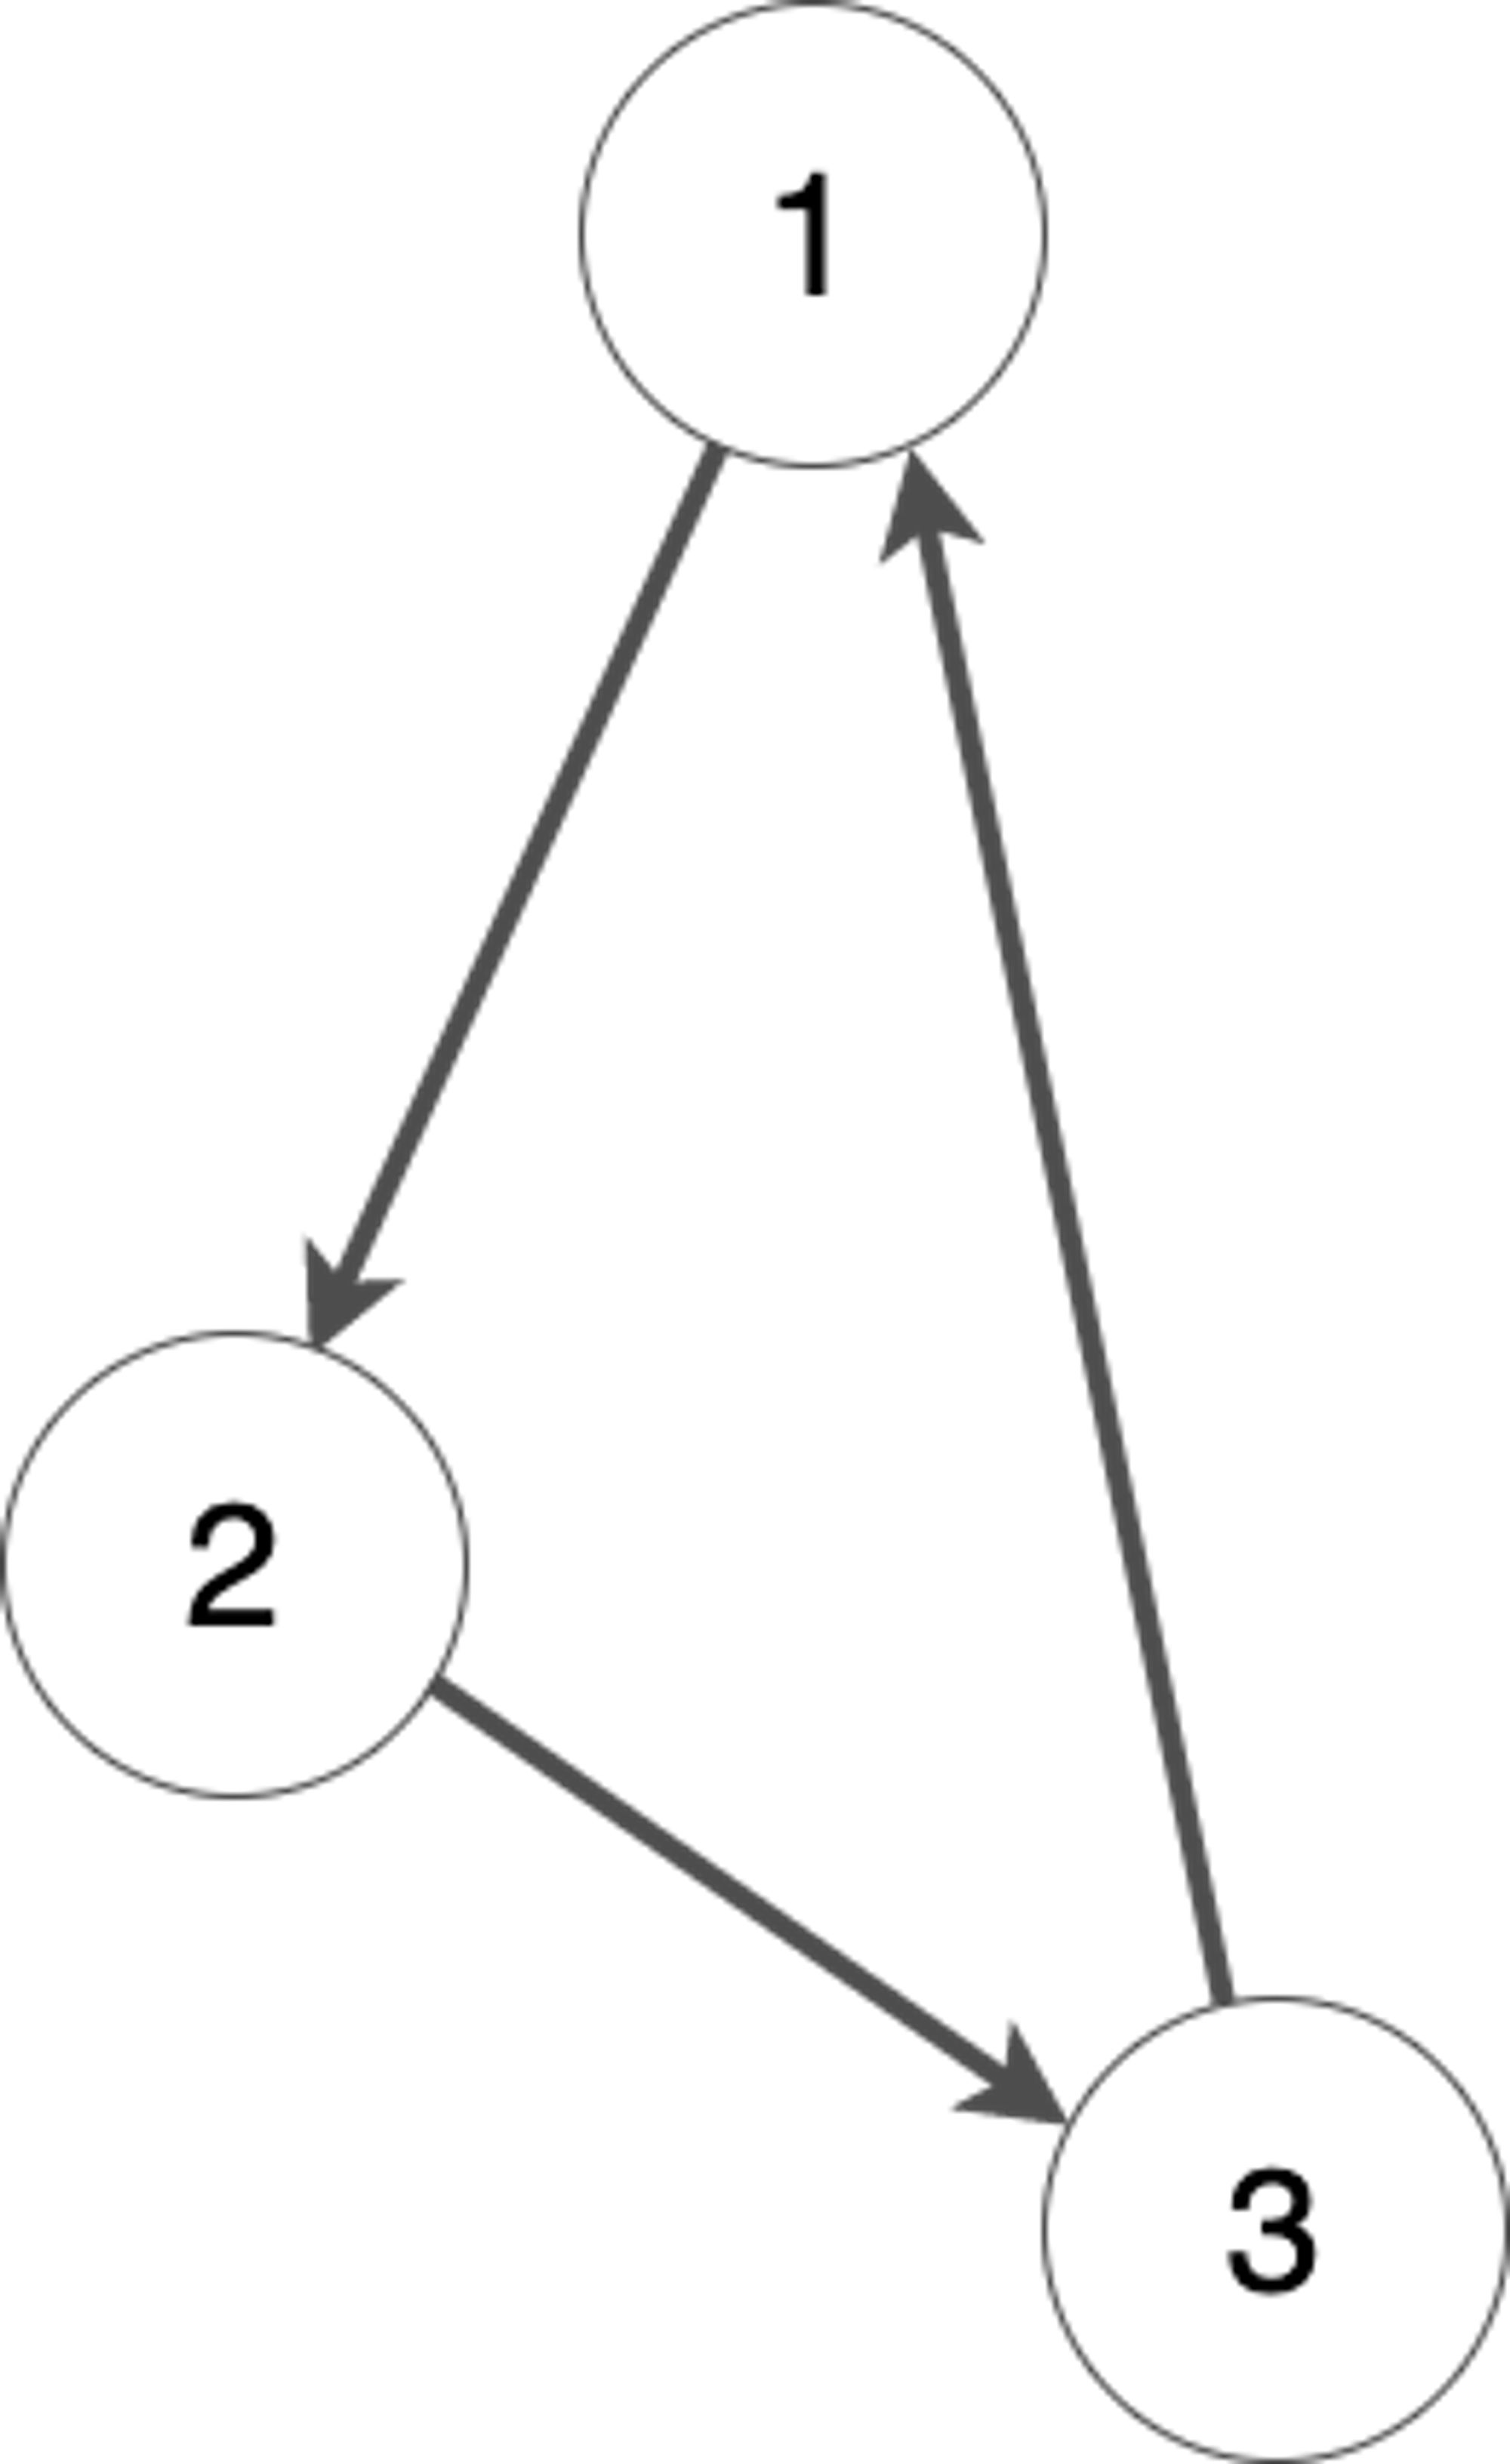 Example 2: All the vertices have 1 incoming and 1 outgoing edge ⇒ the graph is balanced.